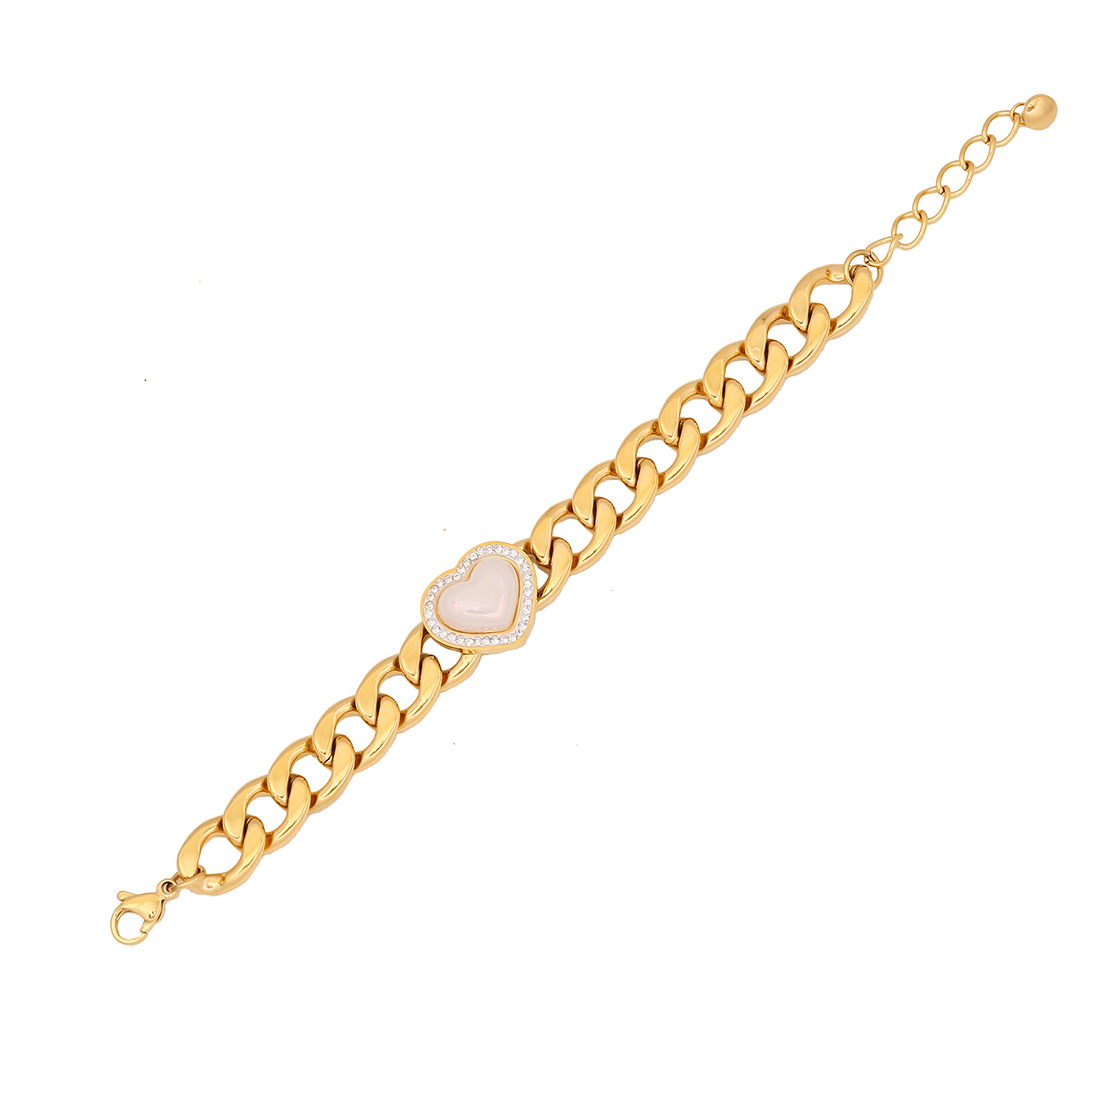 6 bracelet 6.3 inch with 1.6inch extender chain